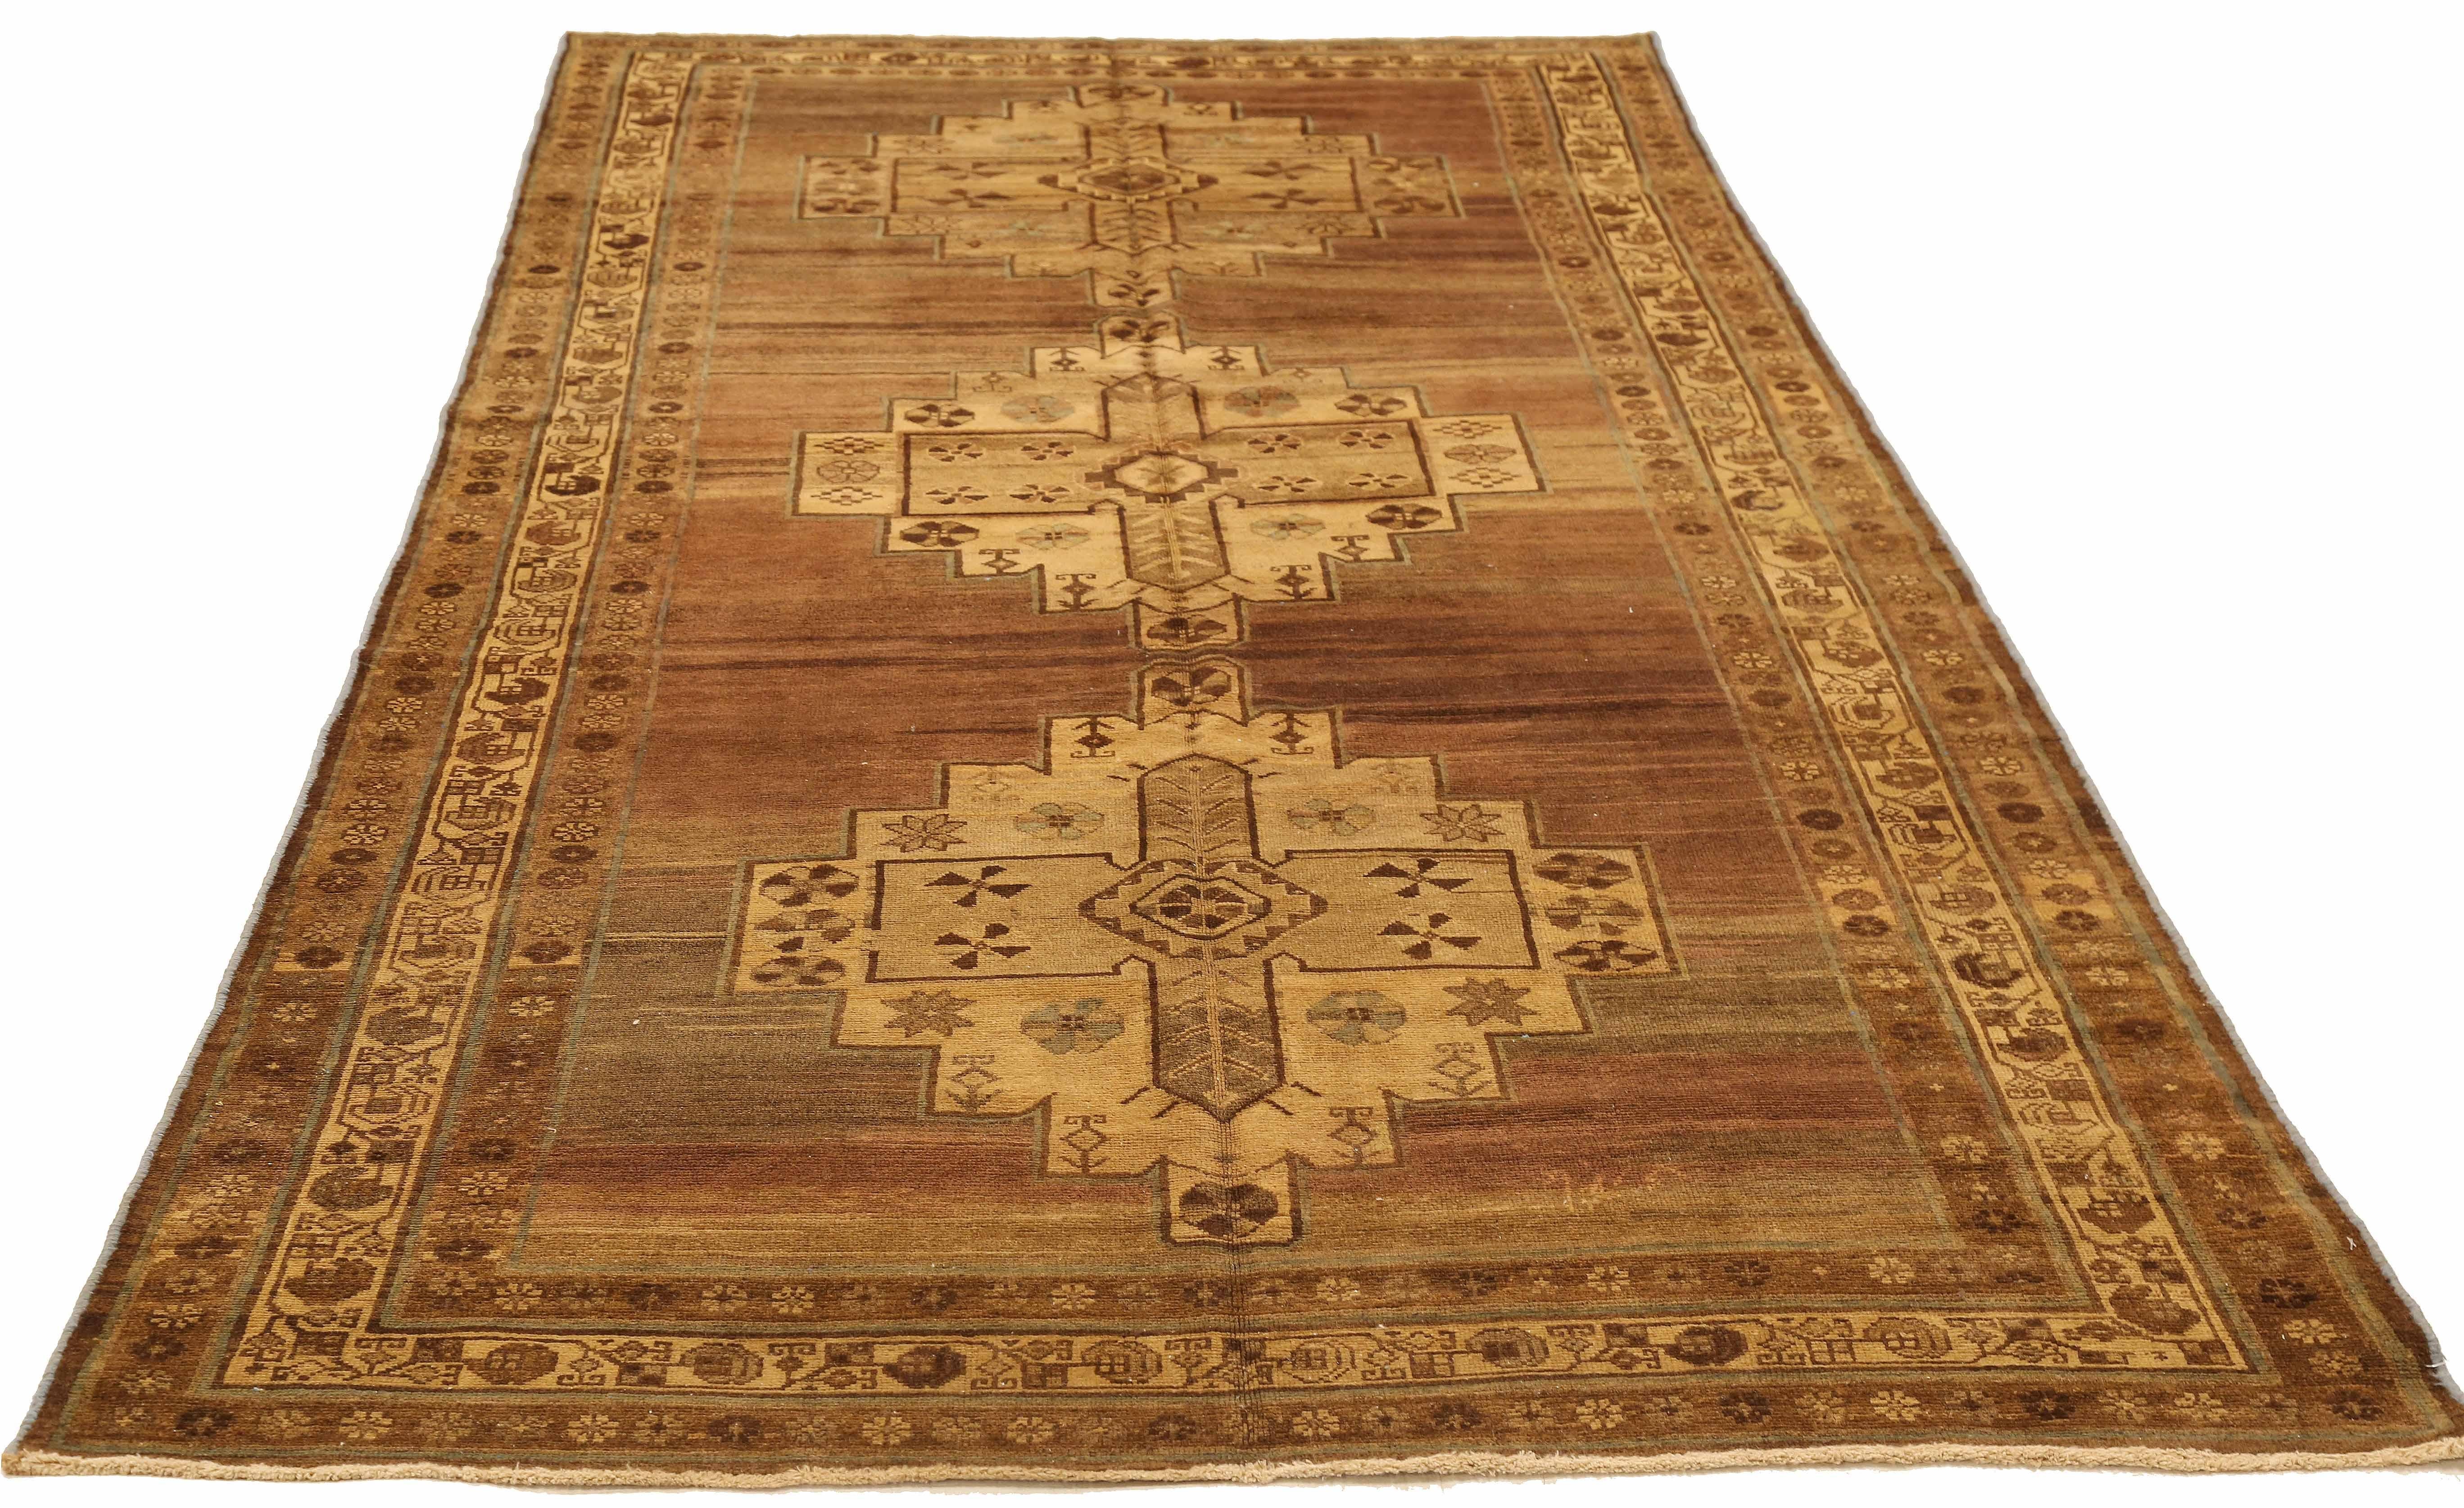 Antique Persian runner rug handwoven from the finest sheep’s wool and colored with all-natural vegetable dyes that are safe for humans and pets. It’s a traditional Malayer design featuring three large cross-like flower medallion details over a brown